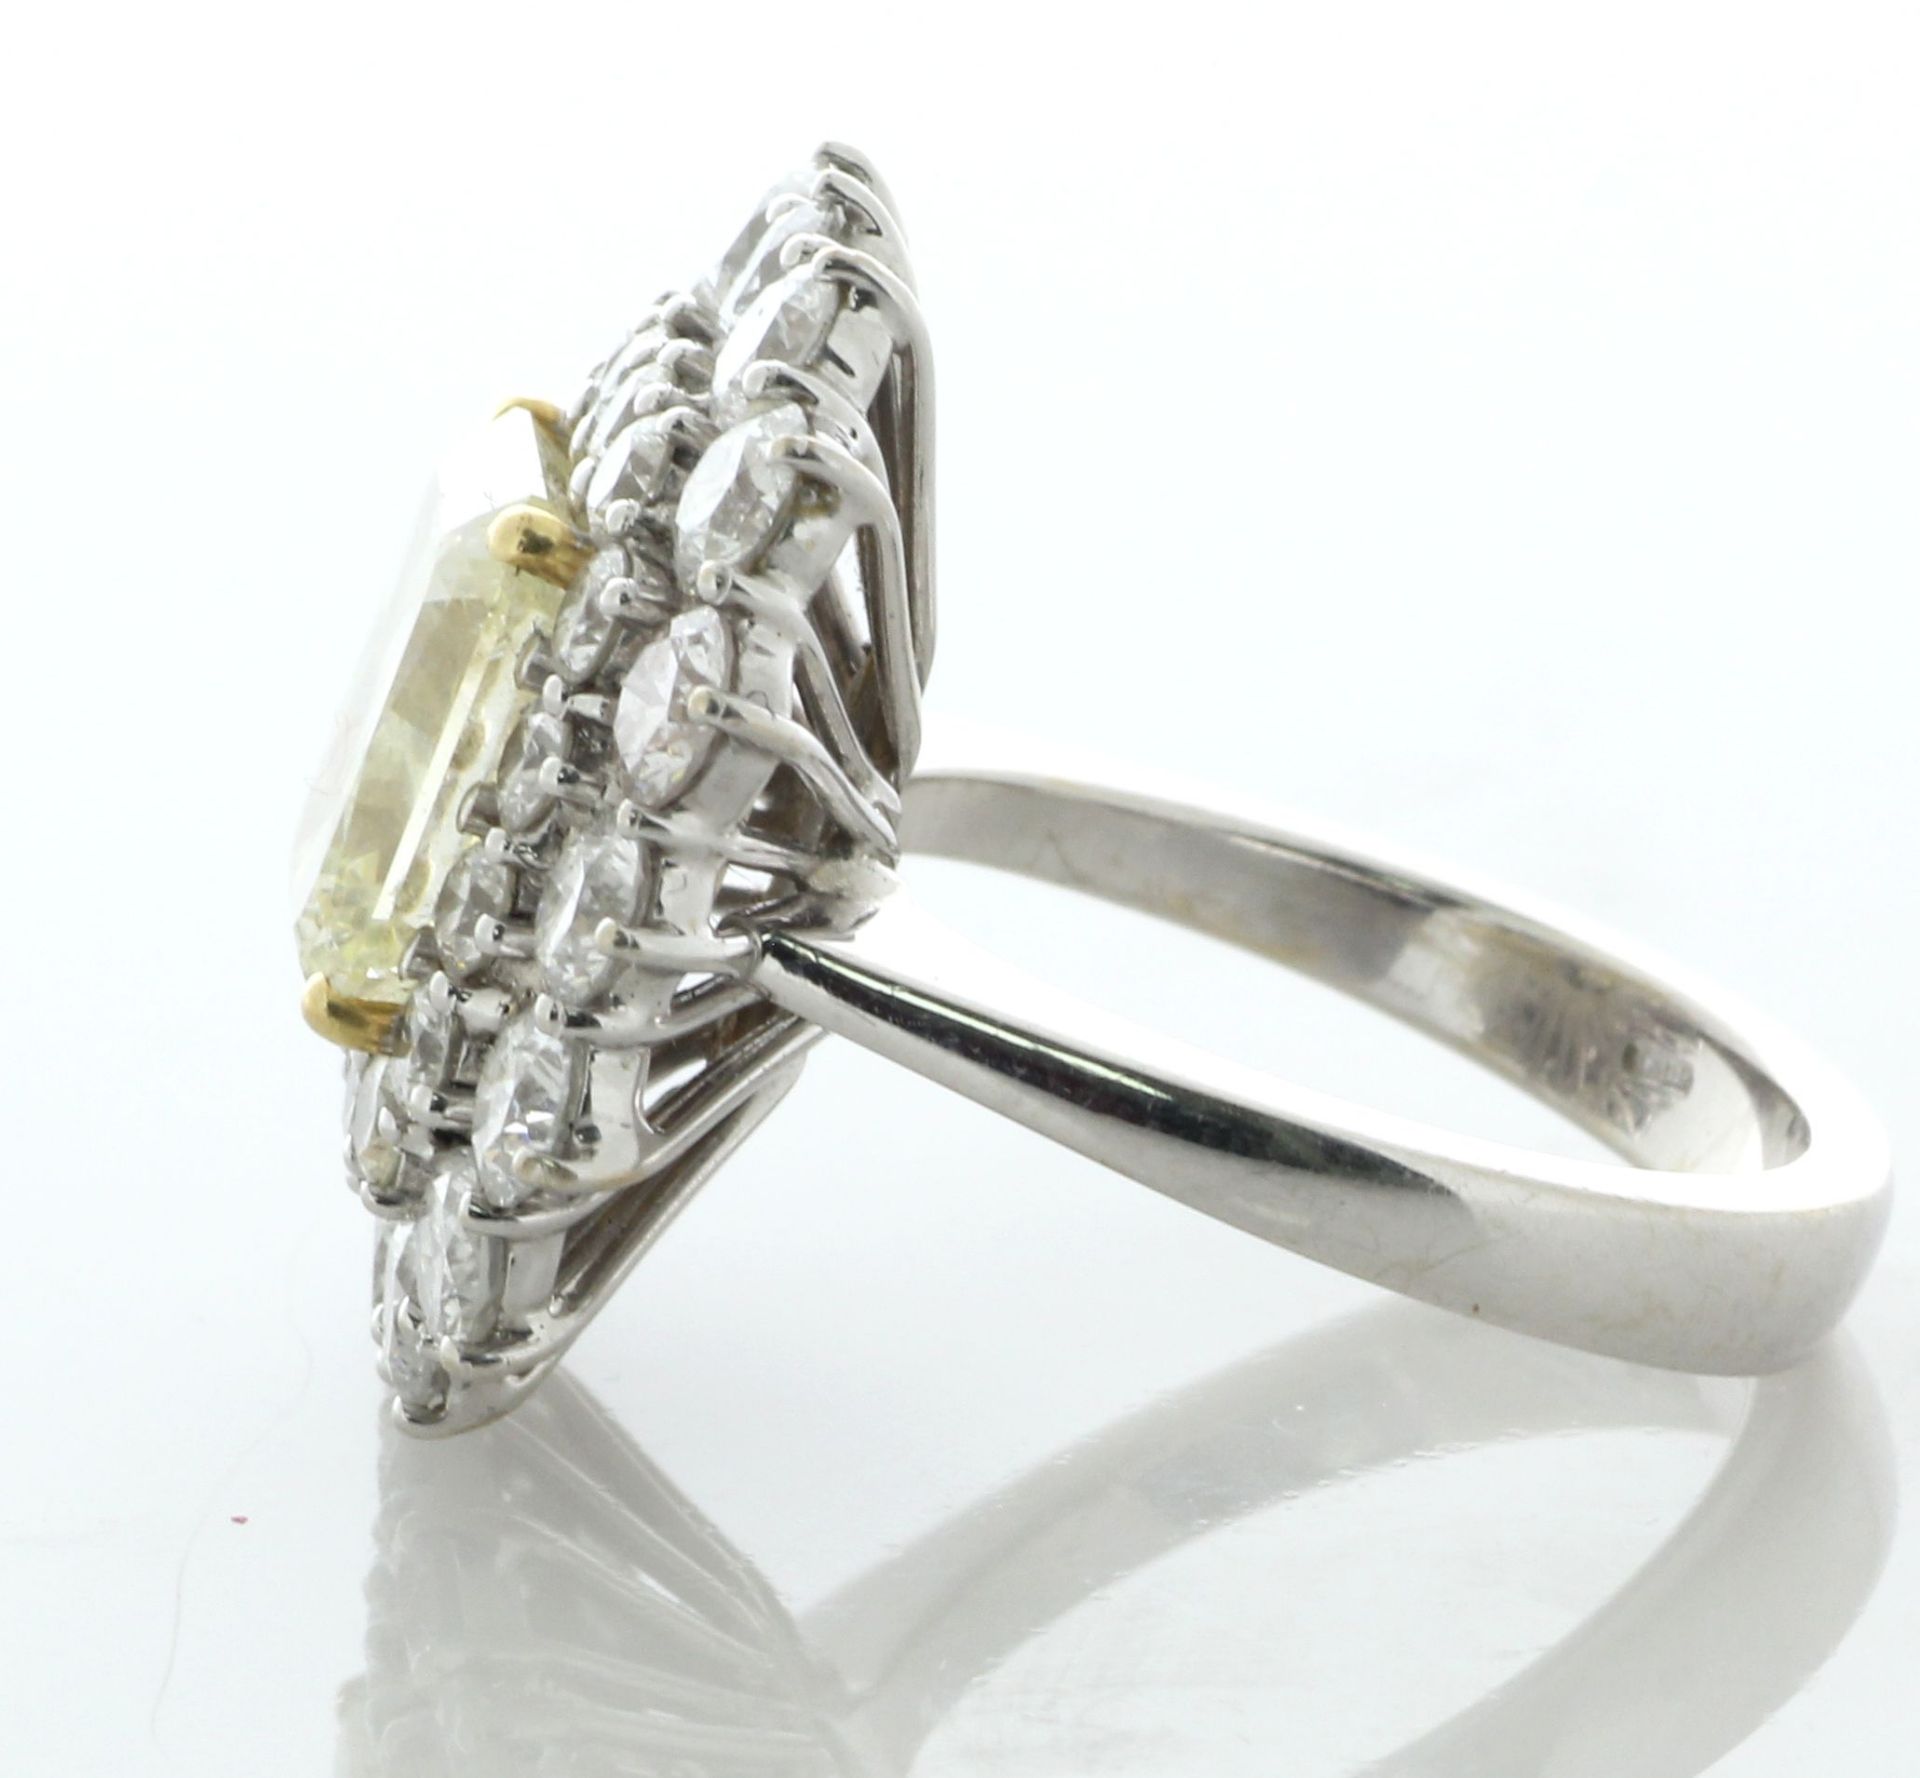 18ct White Gold Radiant Cut Fancy Cluster Diamond Ring (4.58) 2.88 Carats - Image 4 of 8